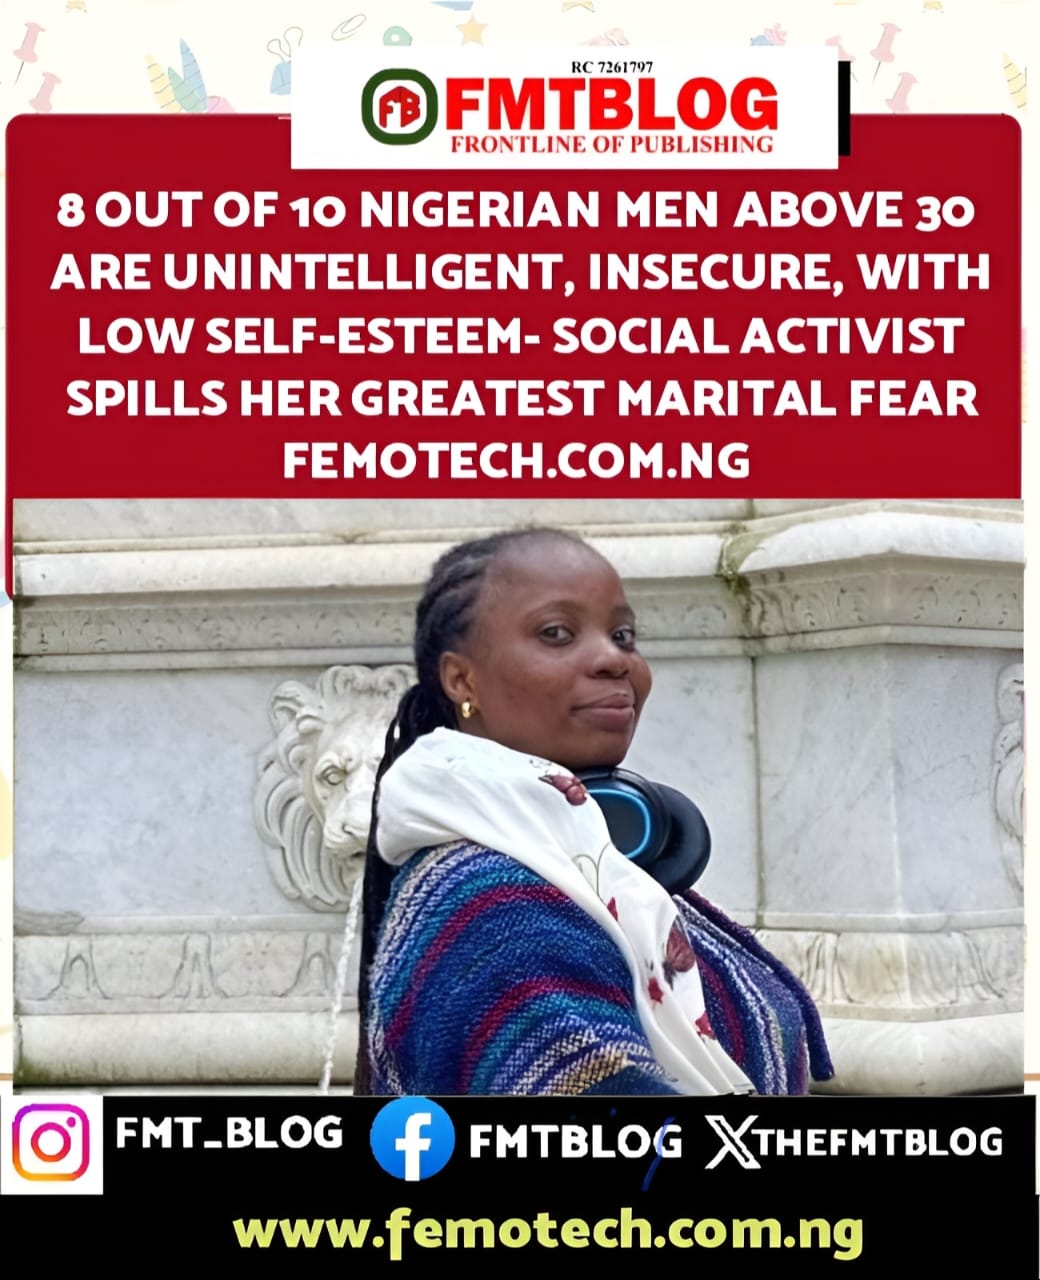 8 Out Of 10 Nigerian Men Above 30 Are Unintelligent, Insecure, With Low Self-Esteem — Nigerian Lady Spills Her Greatest Marital Fears